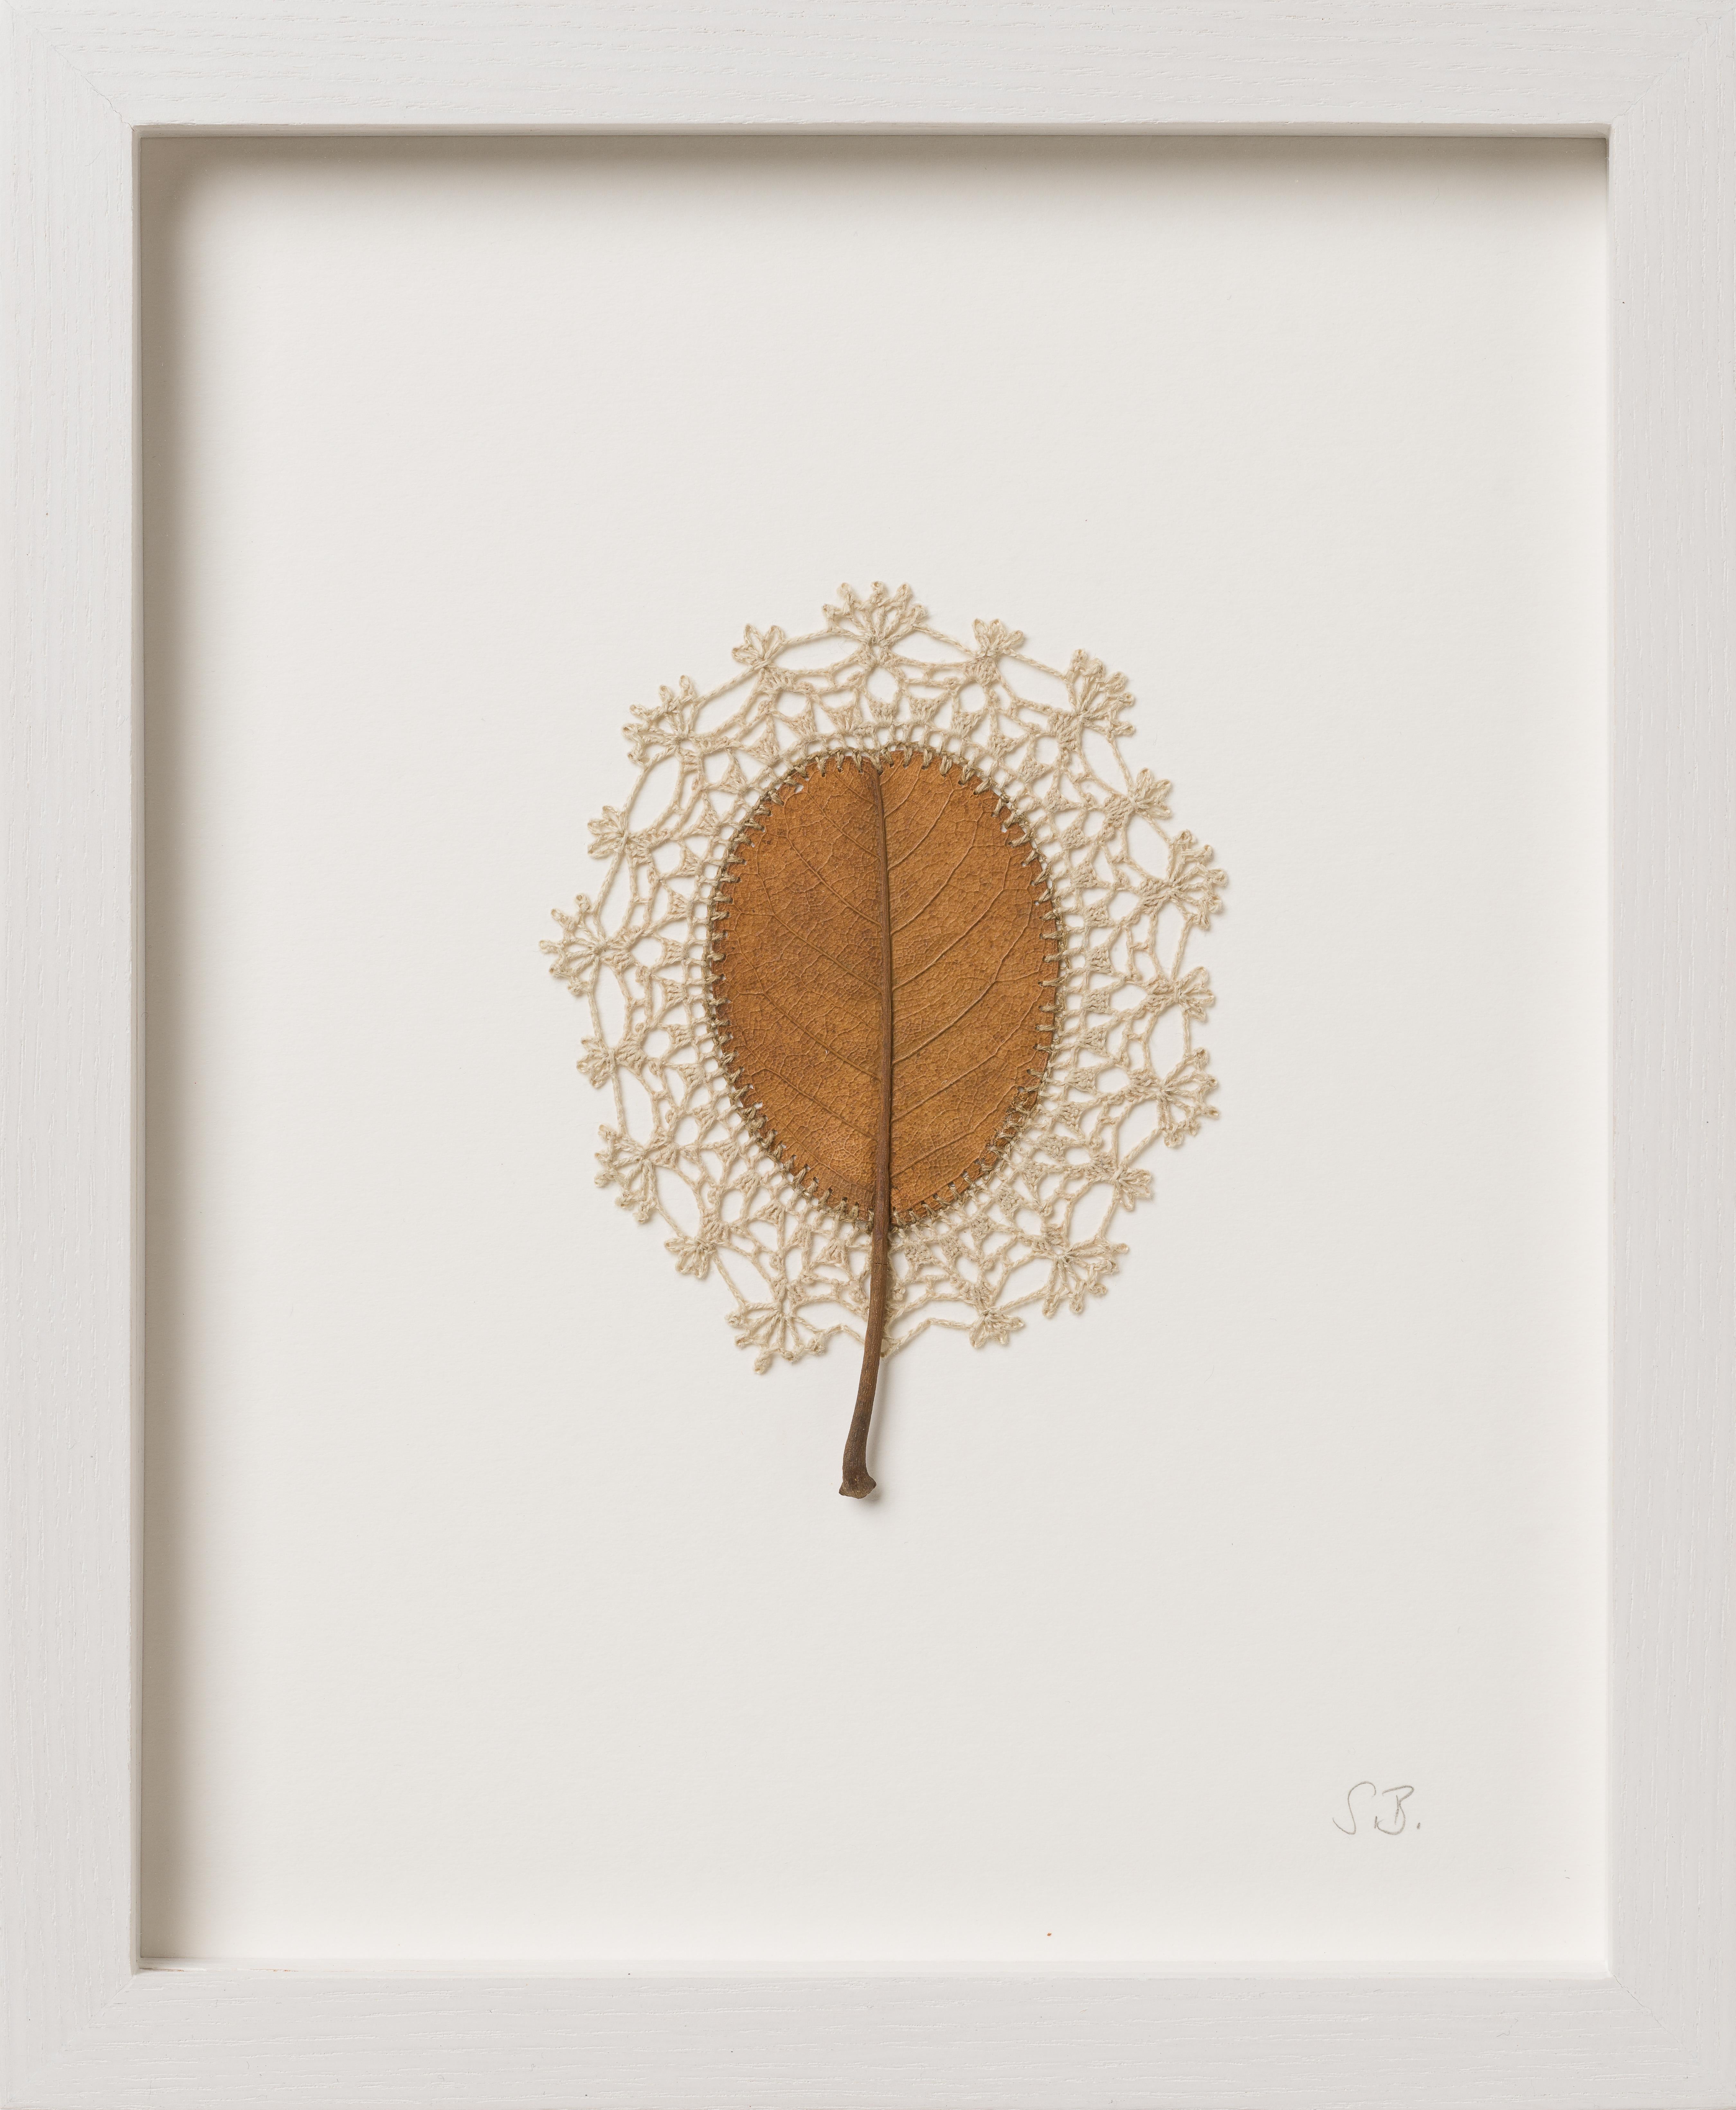 One Day - contemporary crochet dried magnolia leaf nature art framed - Mixed Media Art by Susanna Bauer